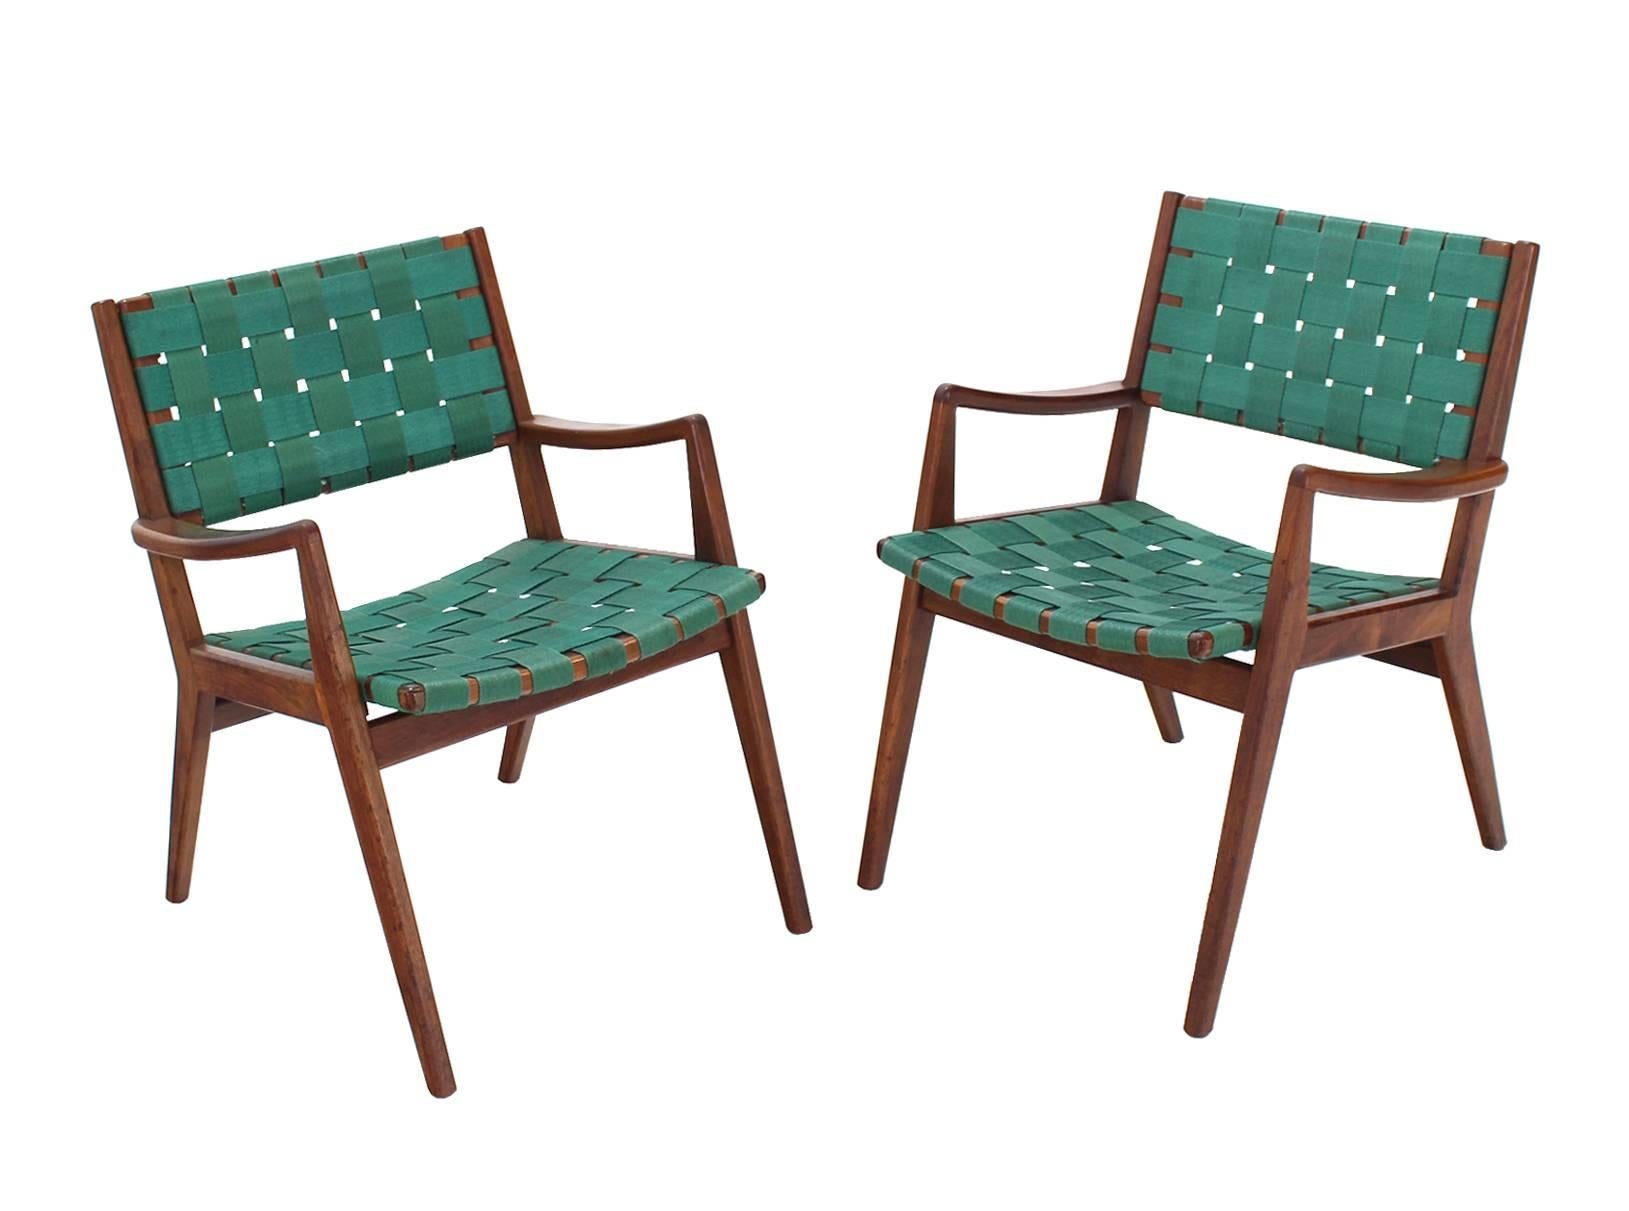 Pair of very nice Mid-Century Modern lounge armchairs possibly designed by Jens Risom.